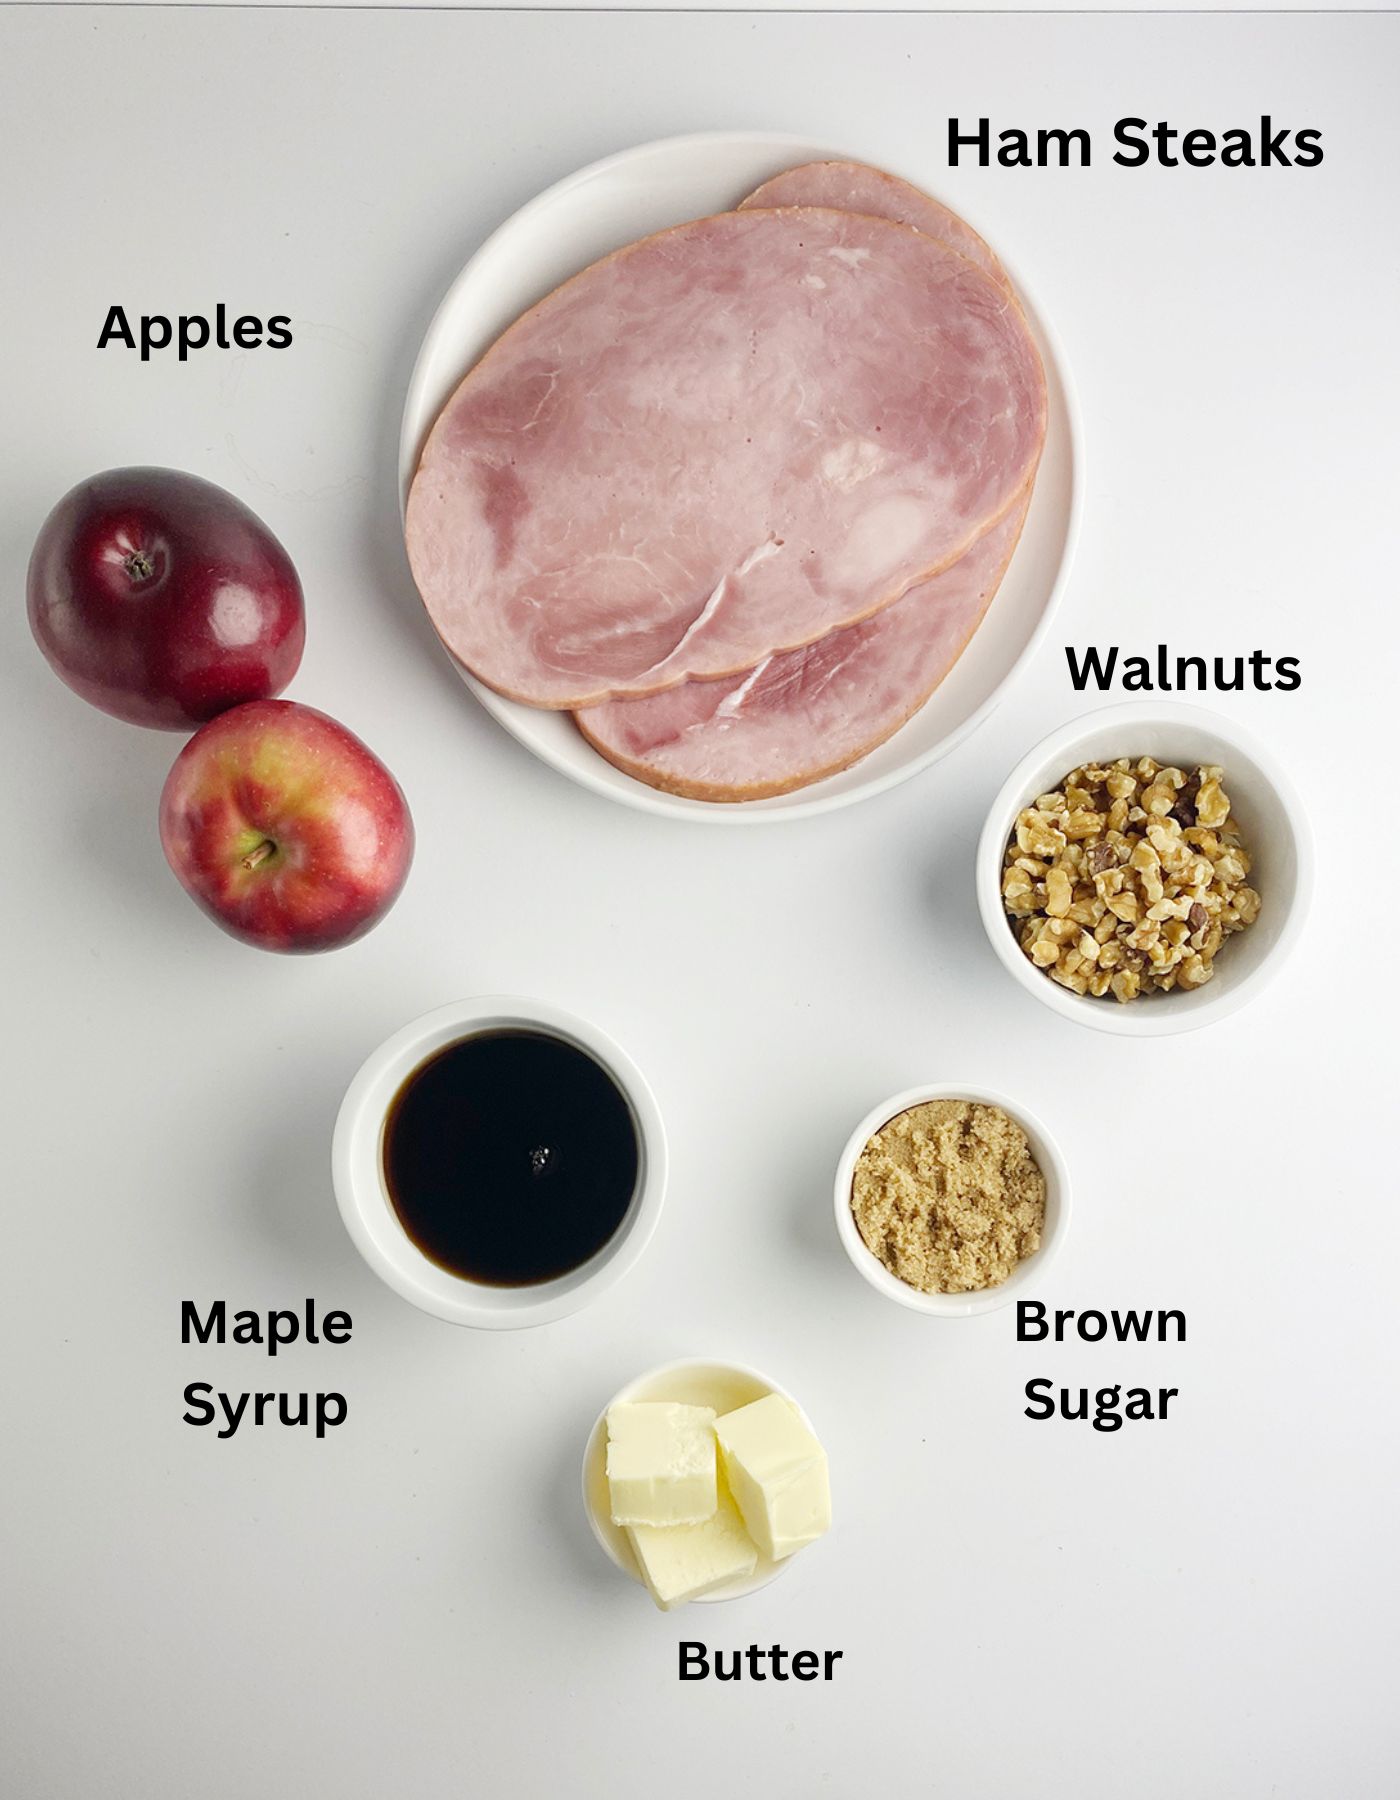 Ingredients needed to make ham steaks with apples.